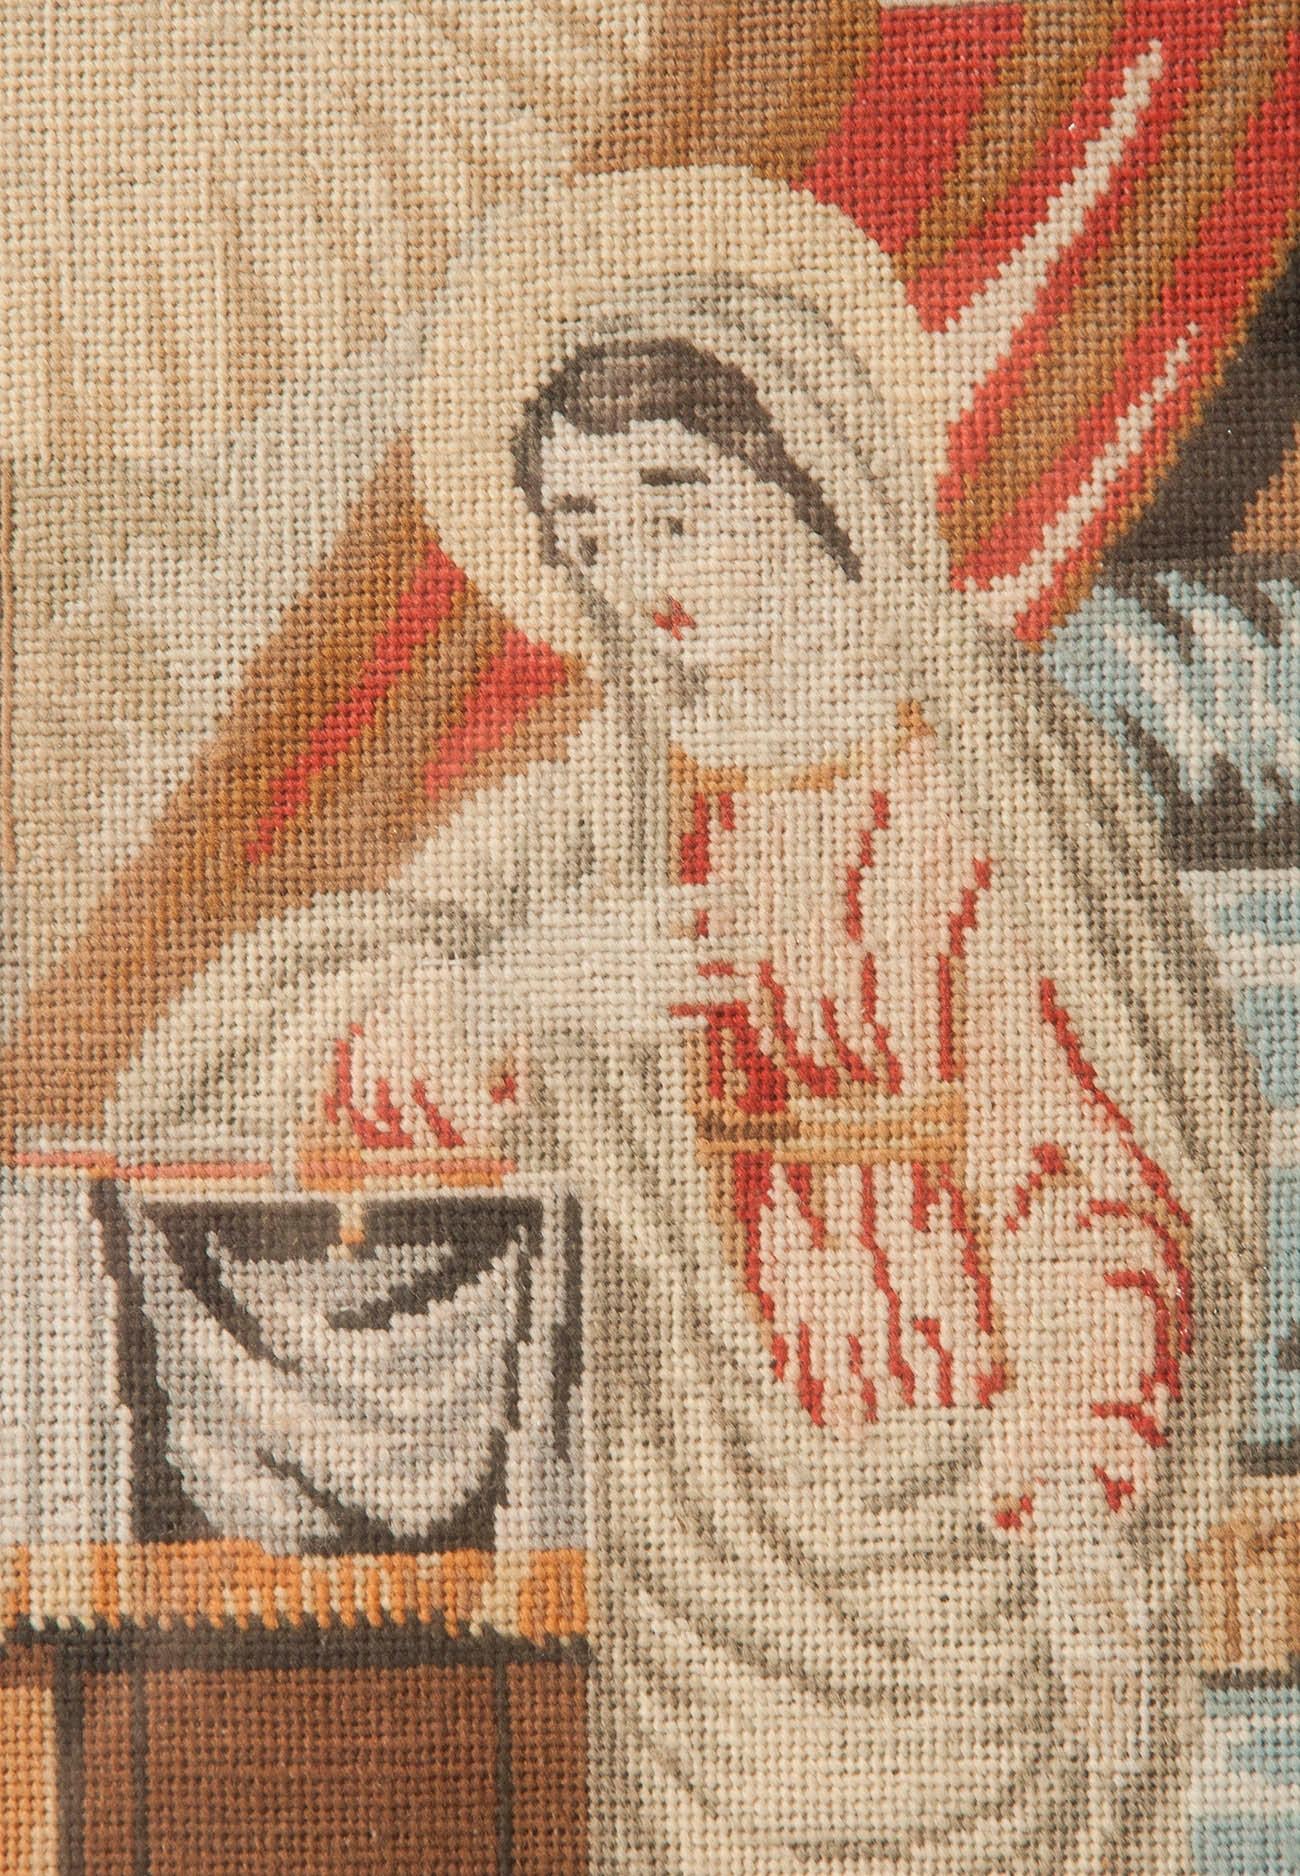 Embroidered Annunciation to the Blessed Virgin Mary Needlepoint Tapestry, France, 1850-1870